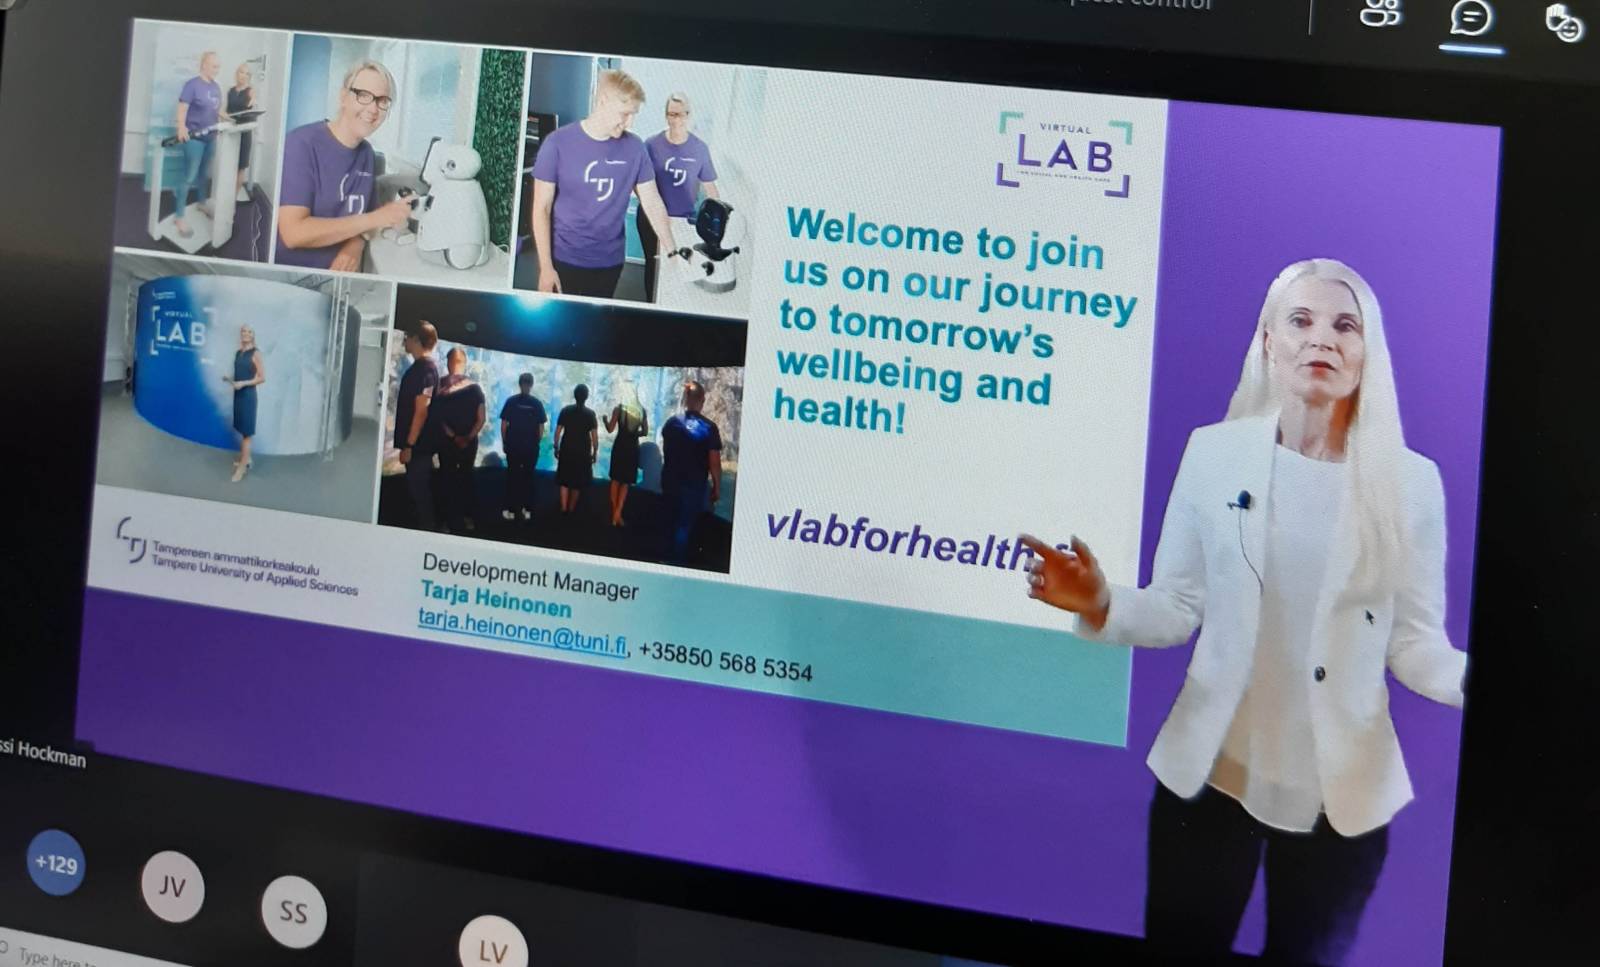 The pitch video of the Lab was presented at Business Finland's Health Tuesday